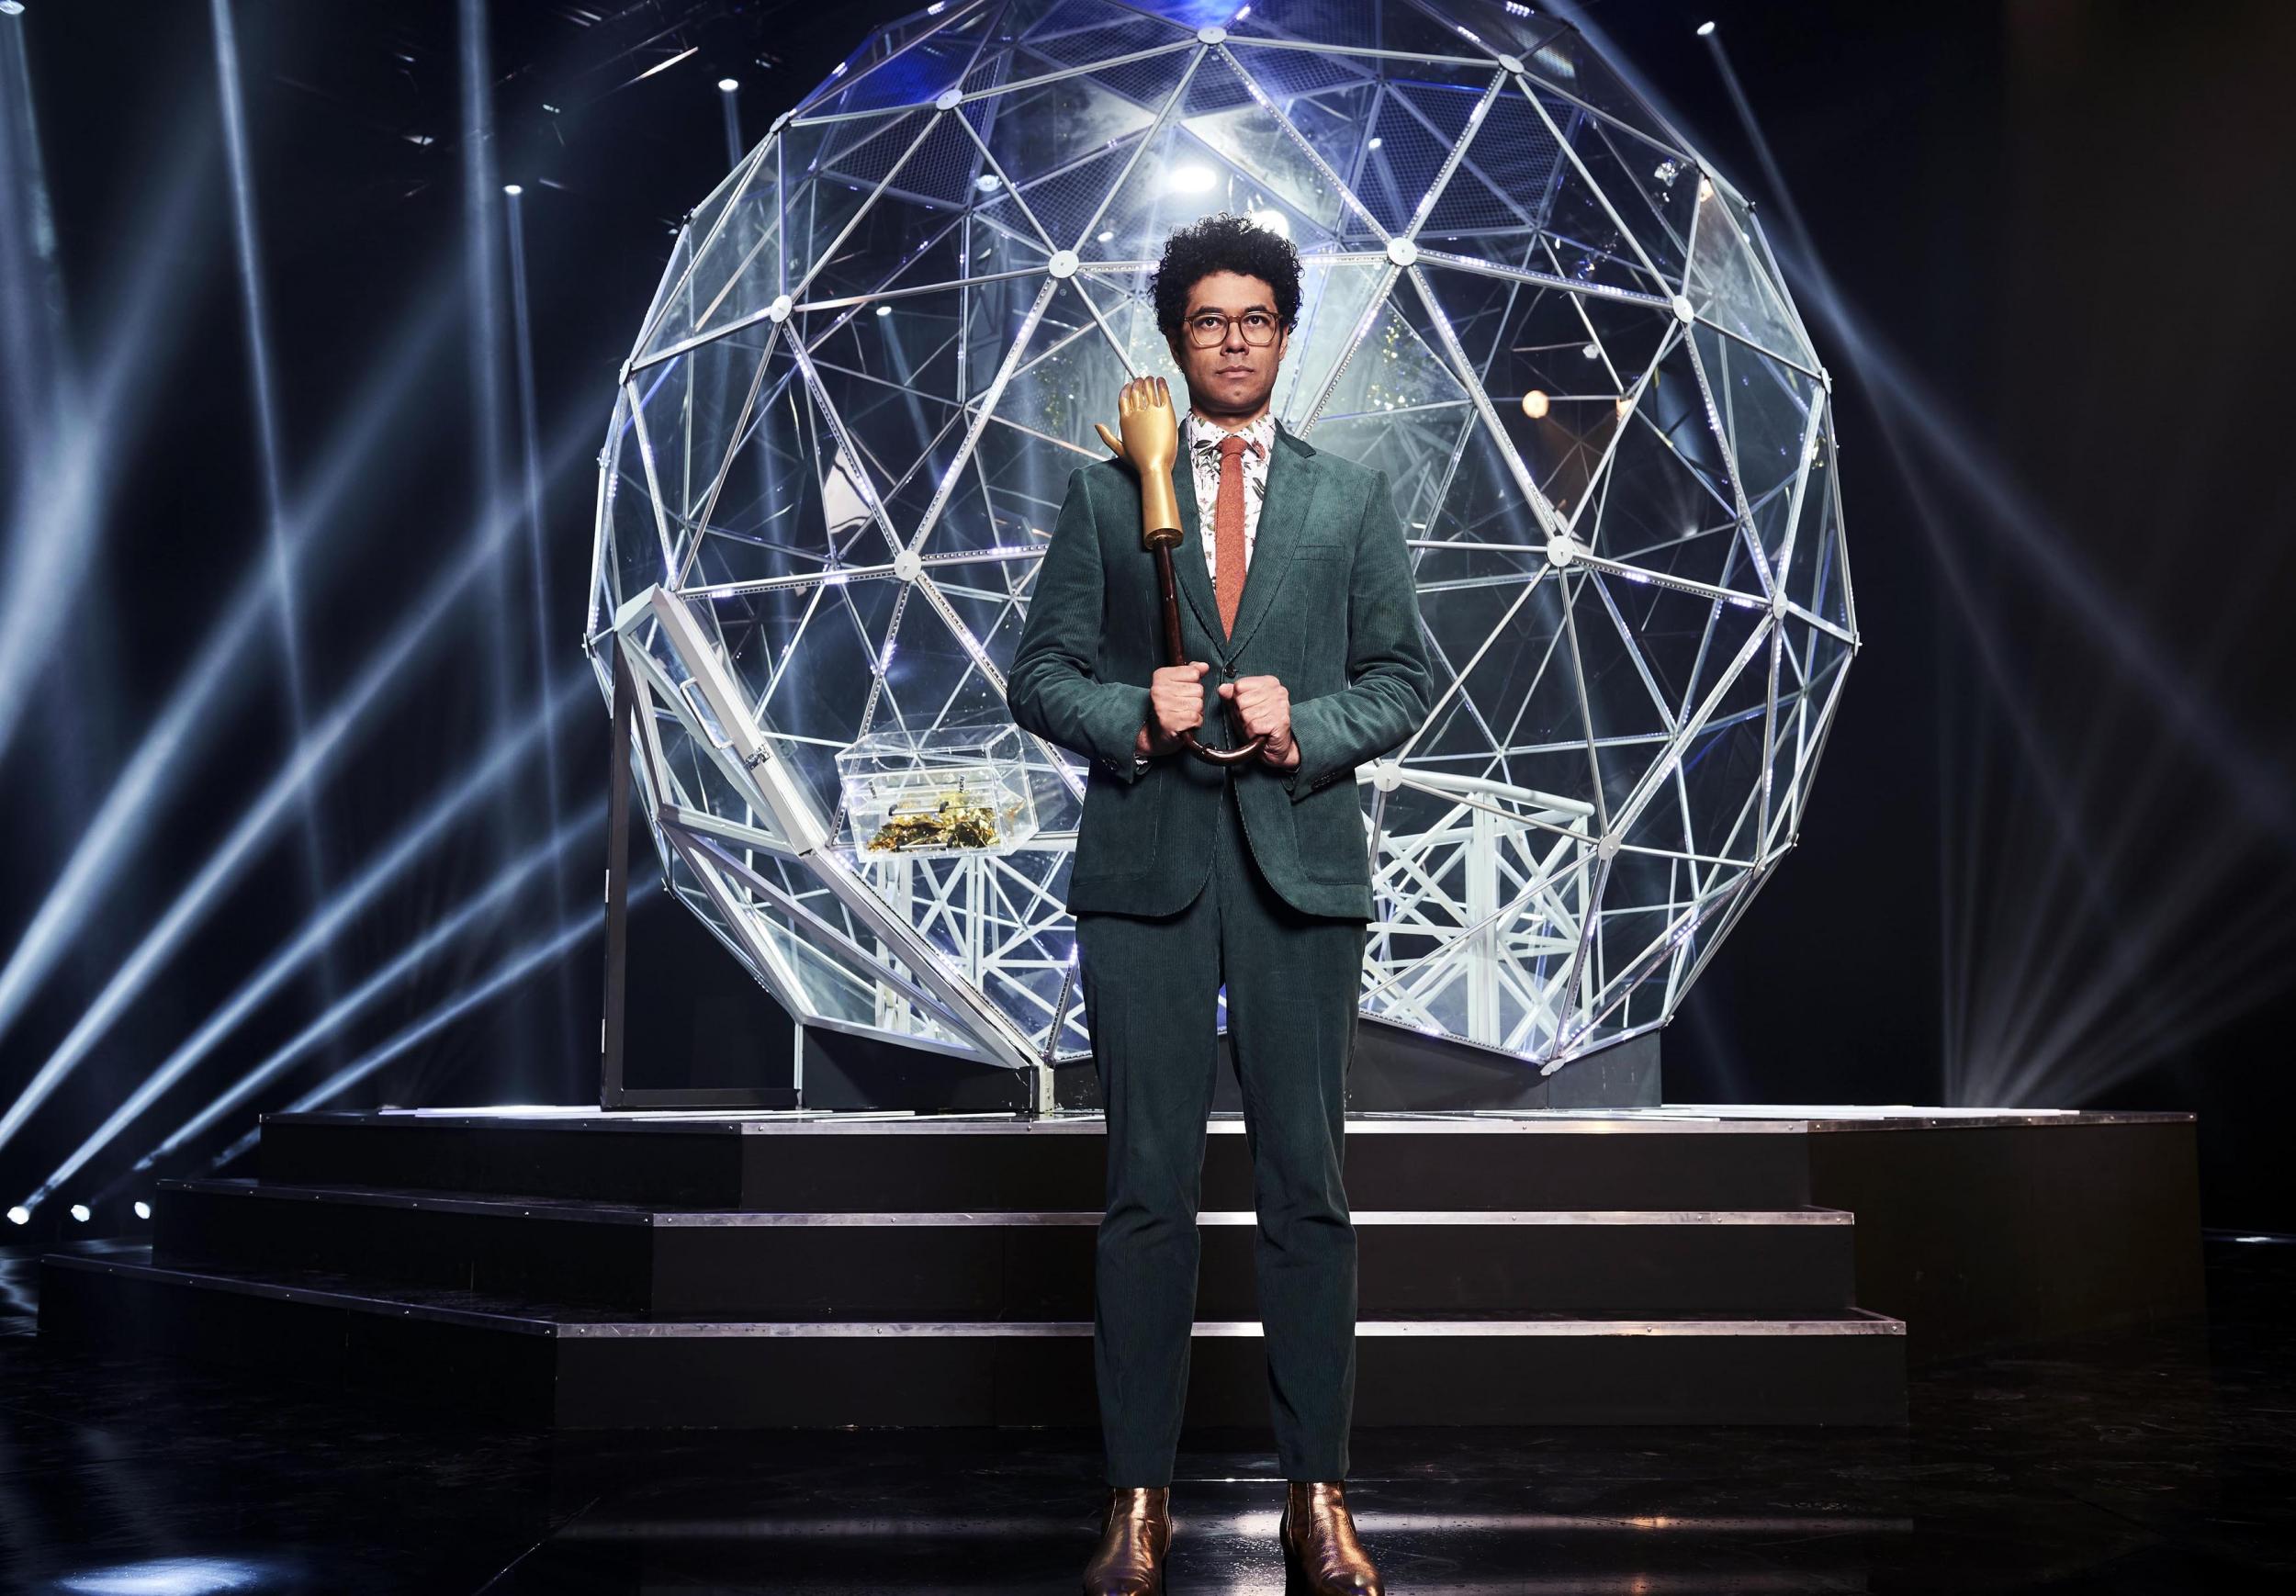 Richard Ayoade is somewhat wasted on ‘The Crystal Maze Celebrity Special’